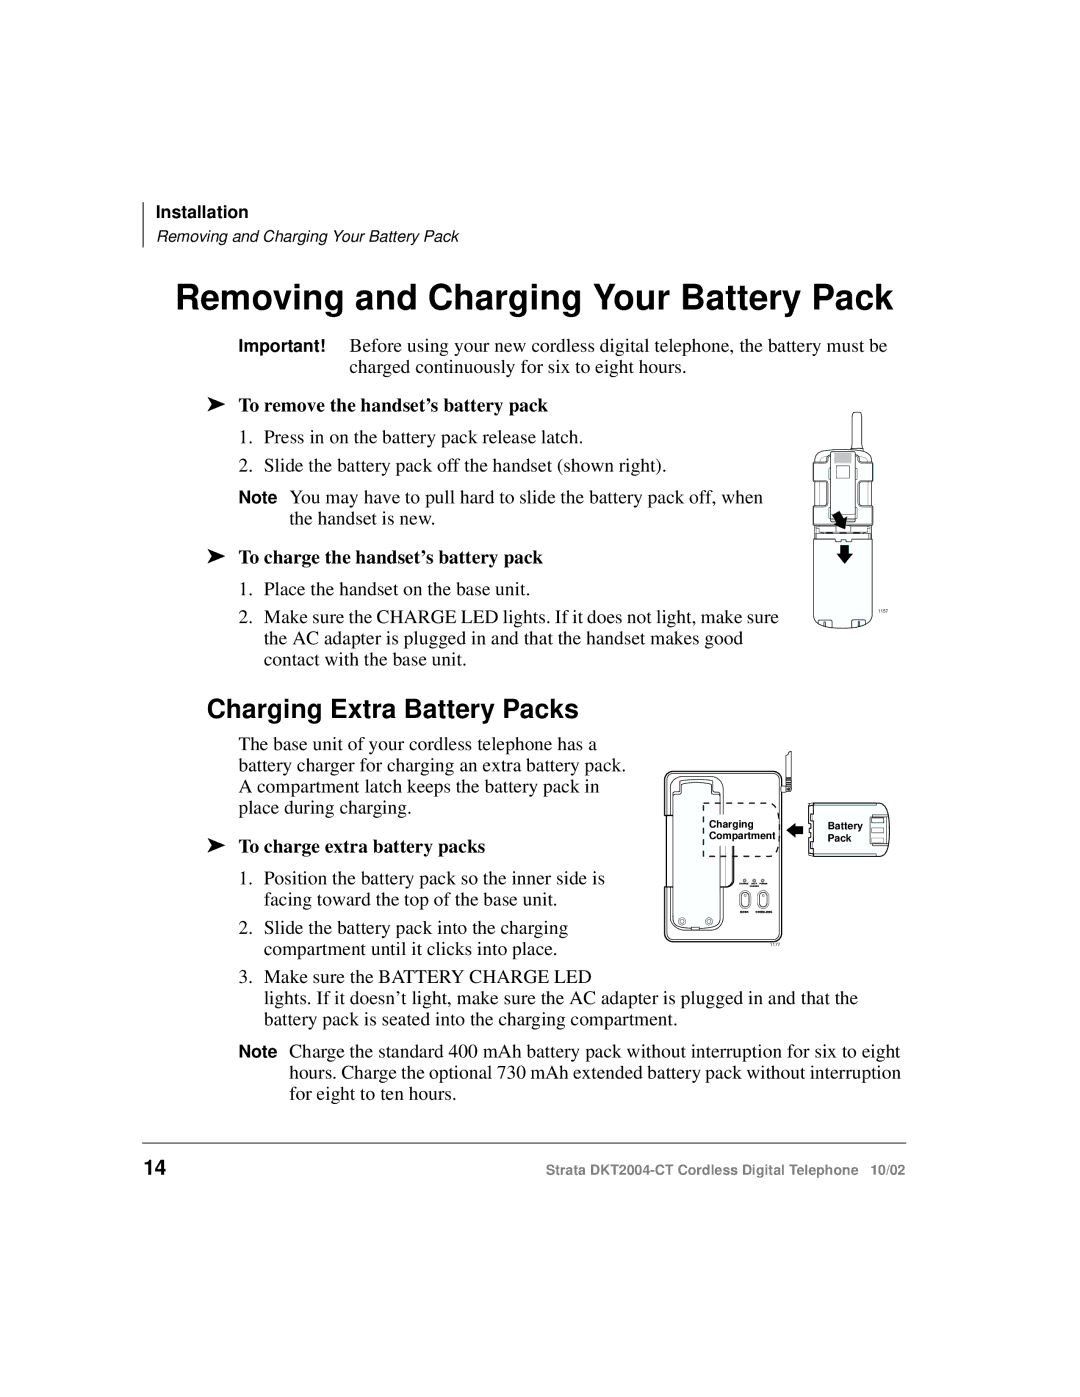 Toshiba DKT2004-CT Removing and Charging Your Battery Pack, Charging Extra Battery Packs, To charge extra battery packs 